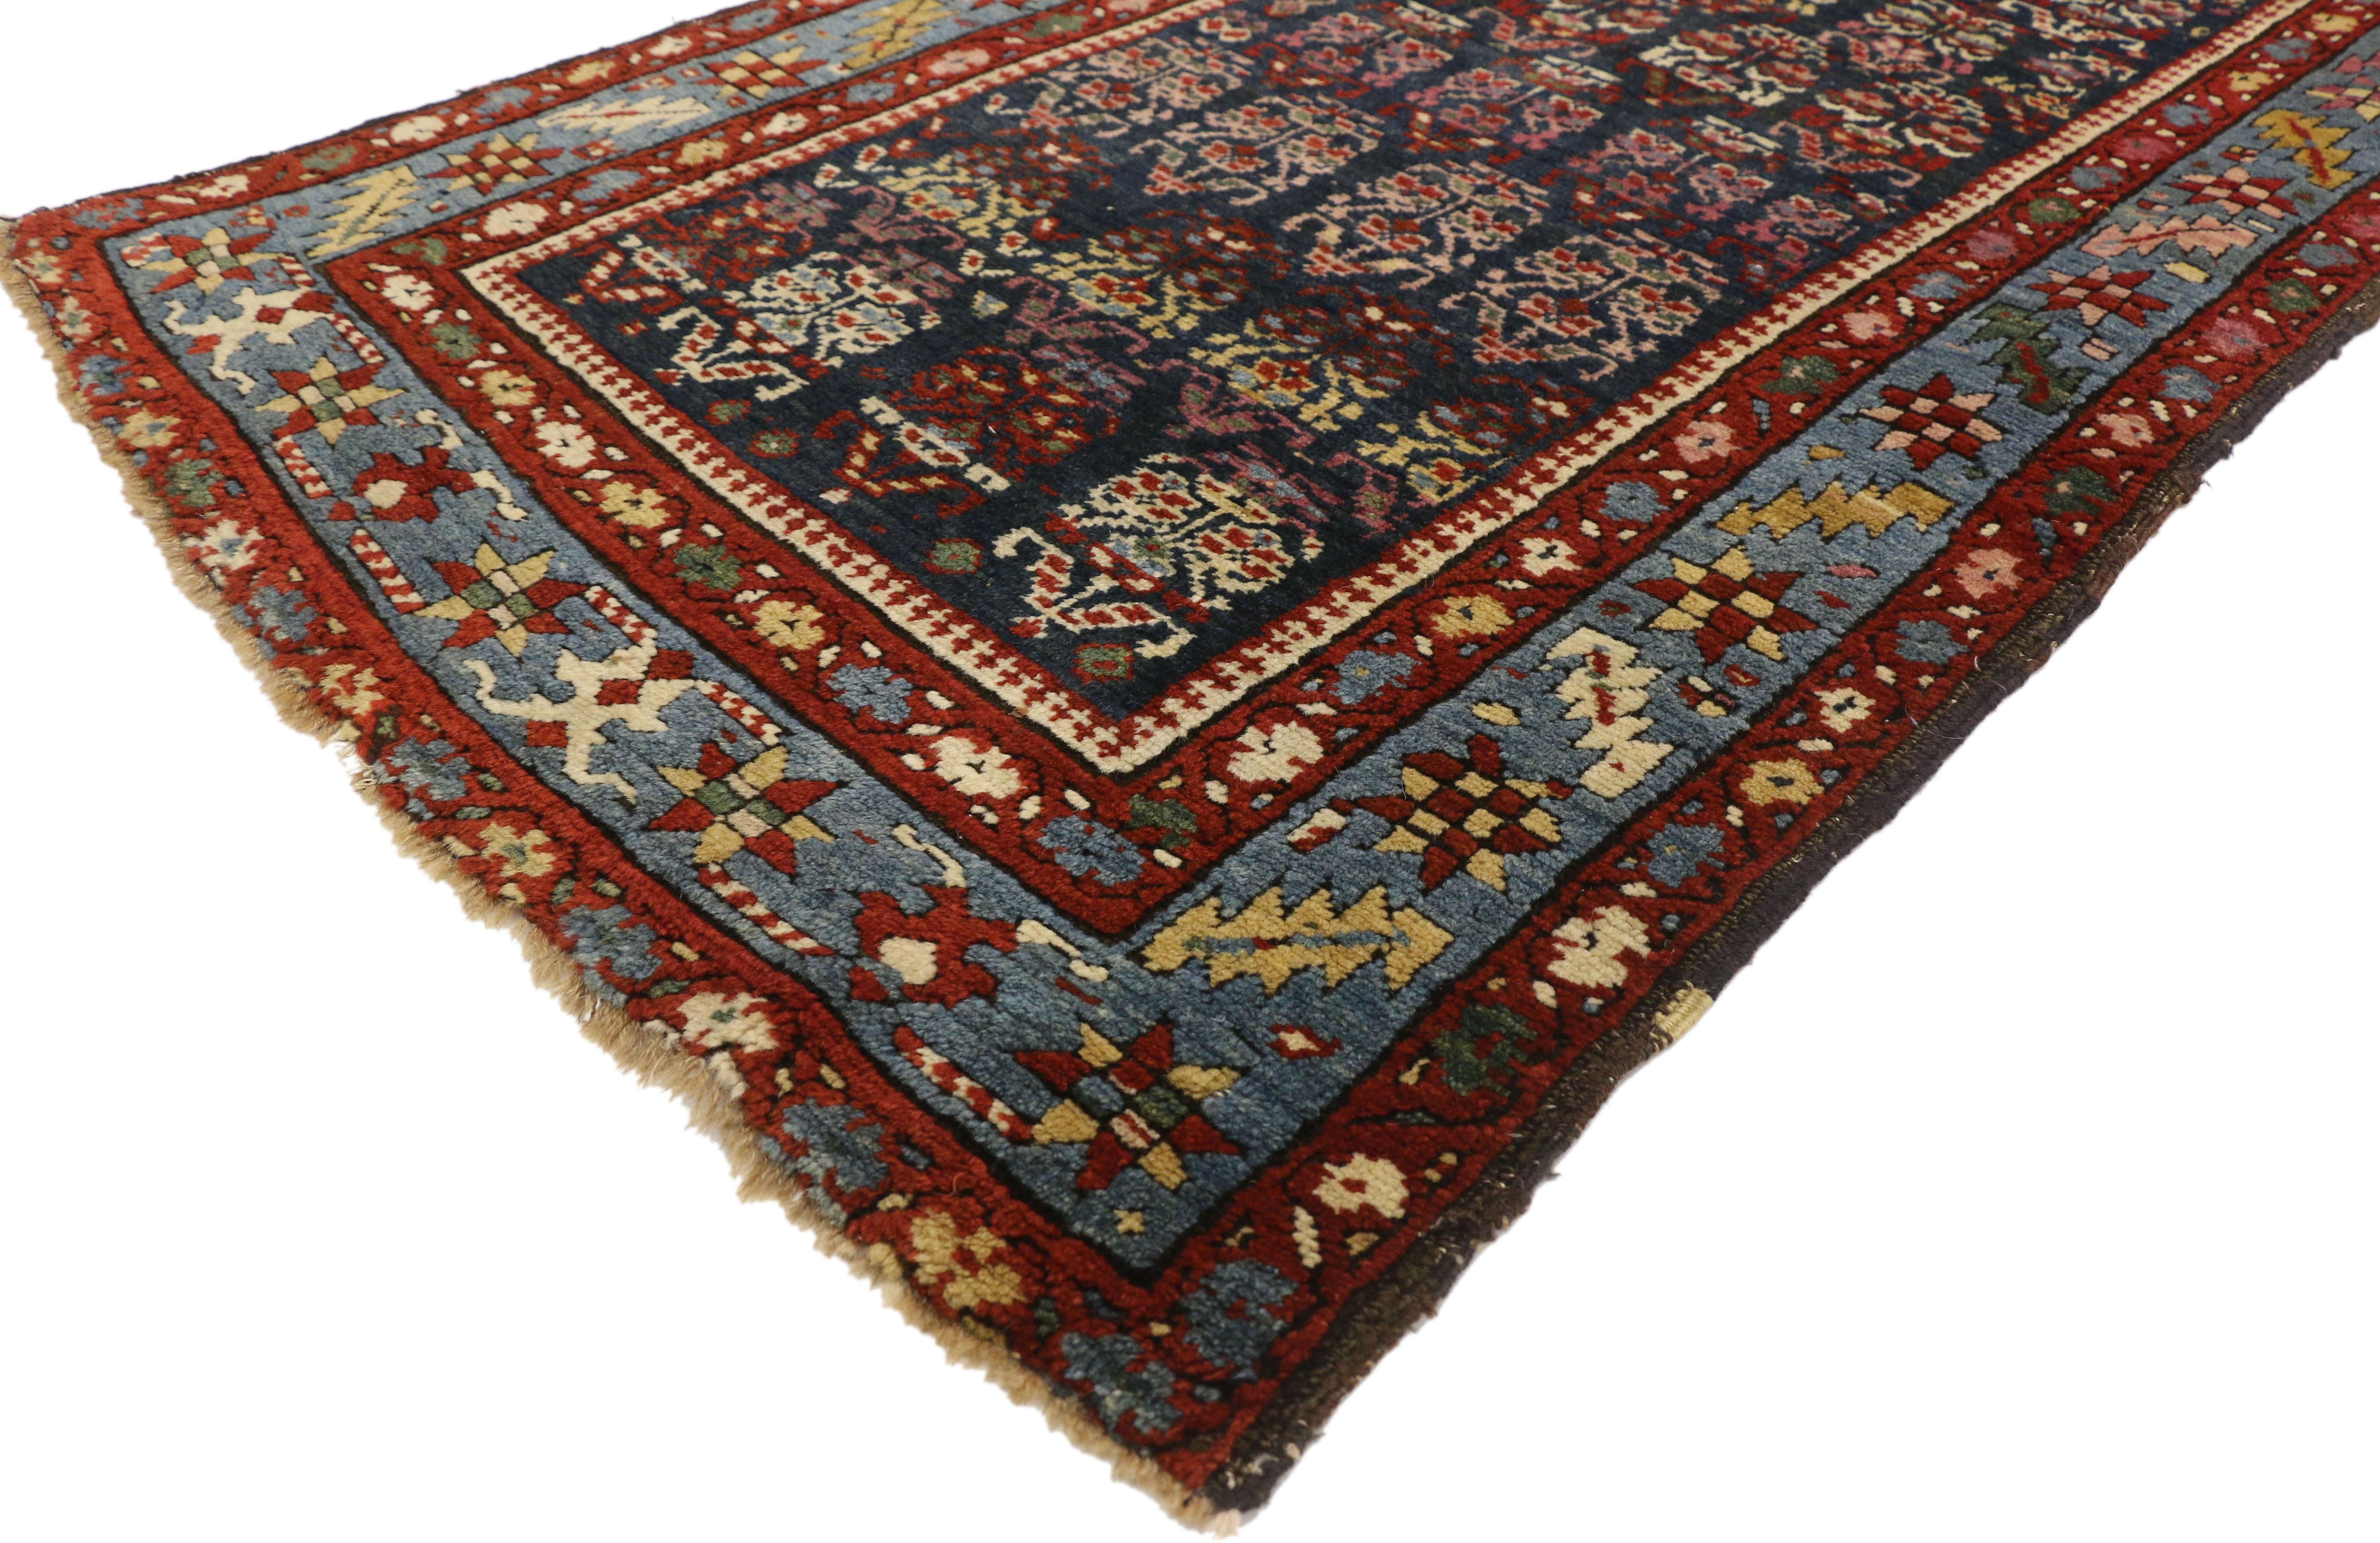 77285 Antique Persian Malayer Hallway Runner with Modern Parisian Style 02'10 x 12'06.  Full of history with woven tales and a dark color palette, this hand knotted wool antique Persian Malayer runner would bring a sense of nostalgic charm to nearly